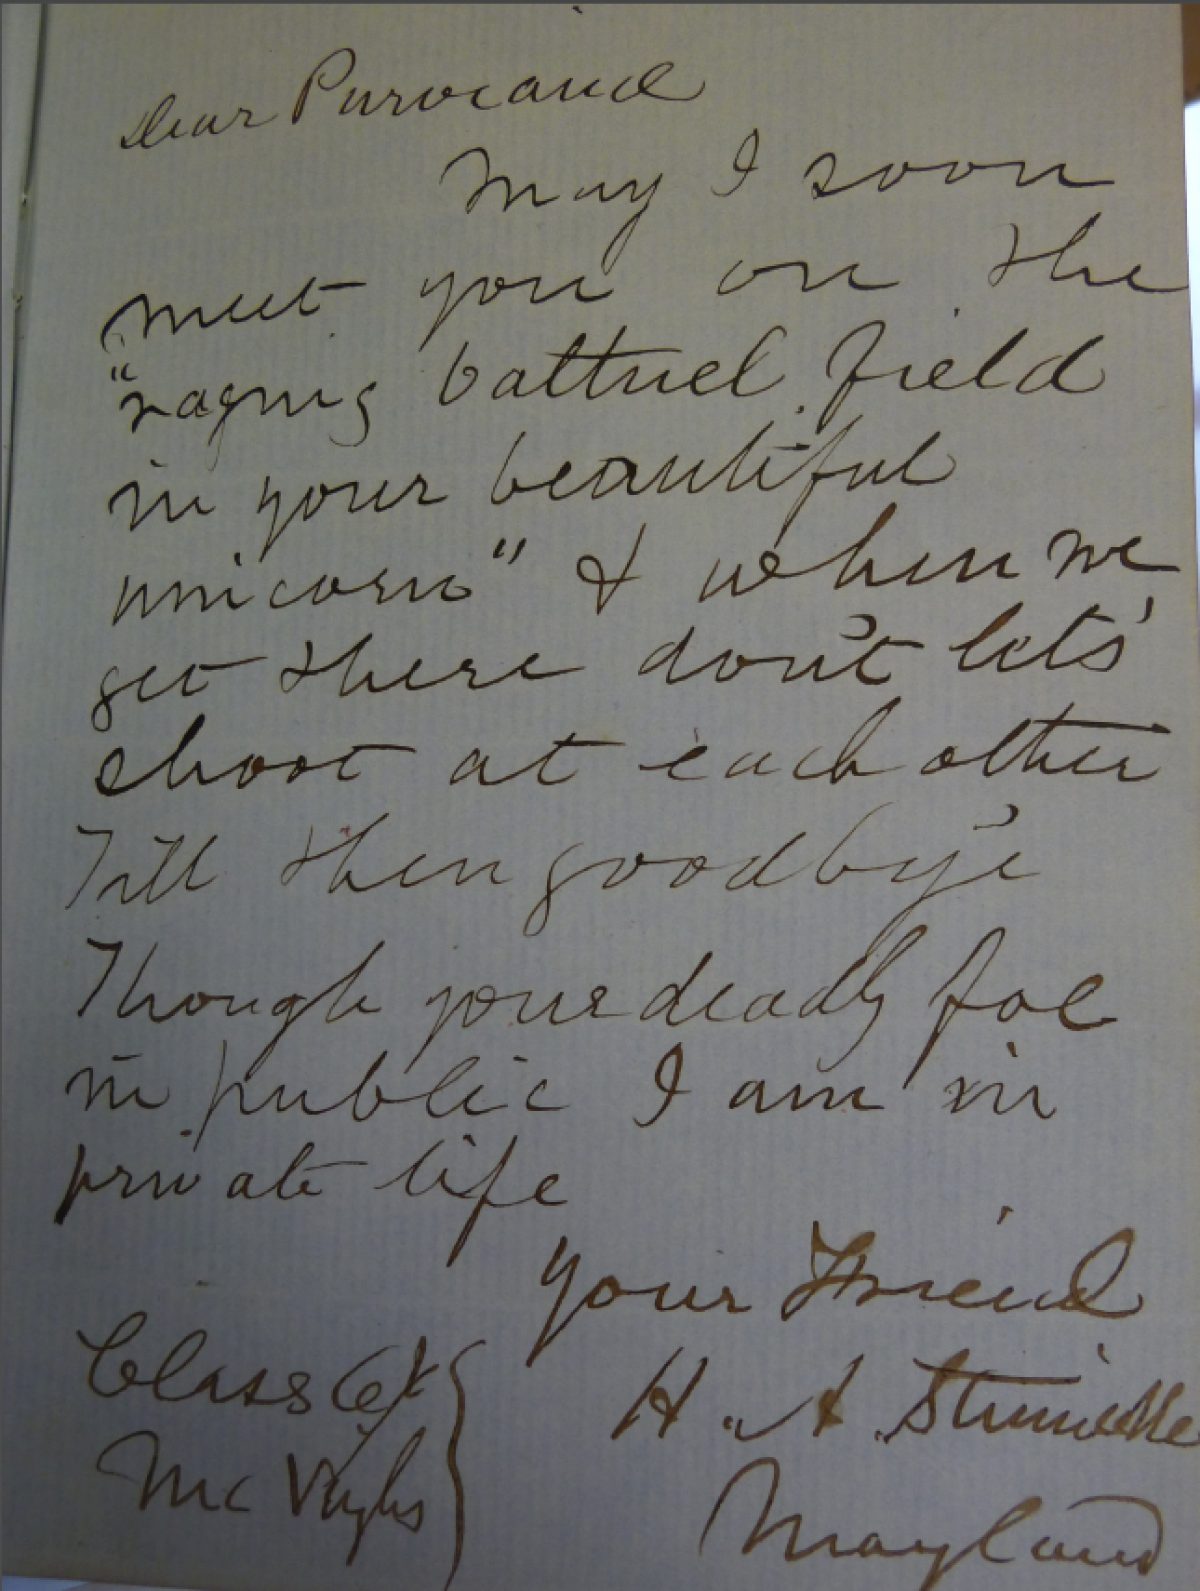 Autograph Book Entry by Henry Stinnecke